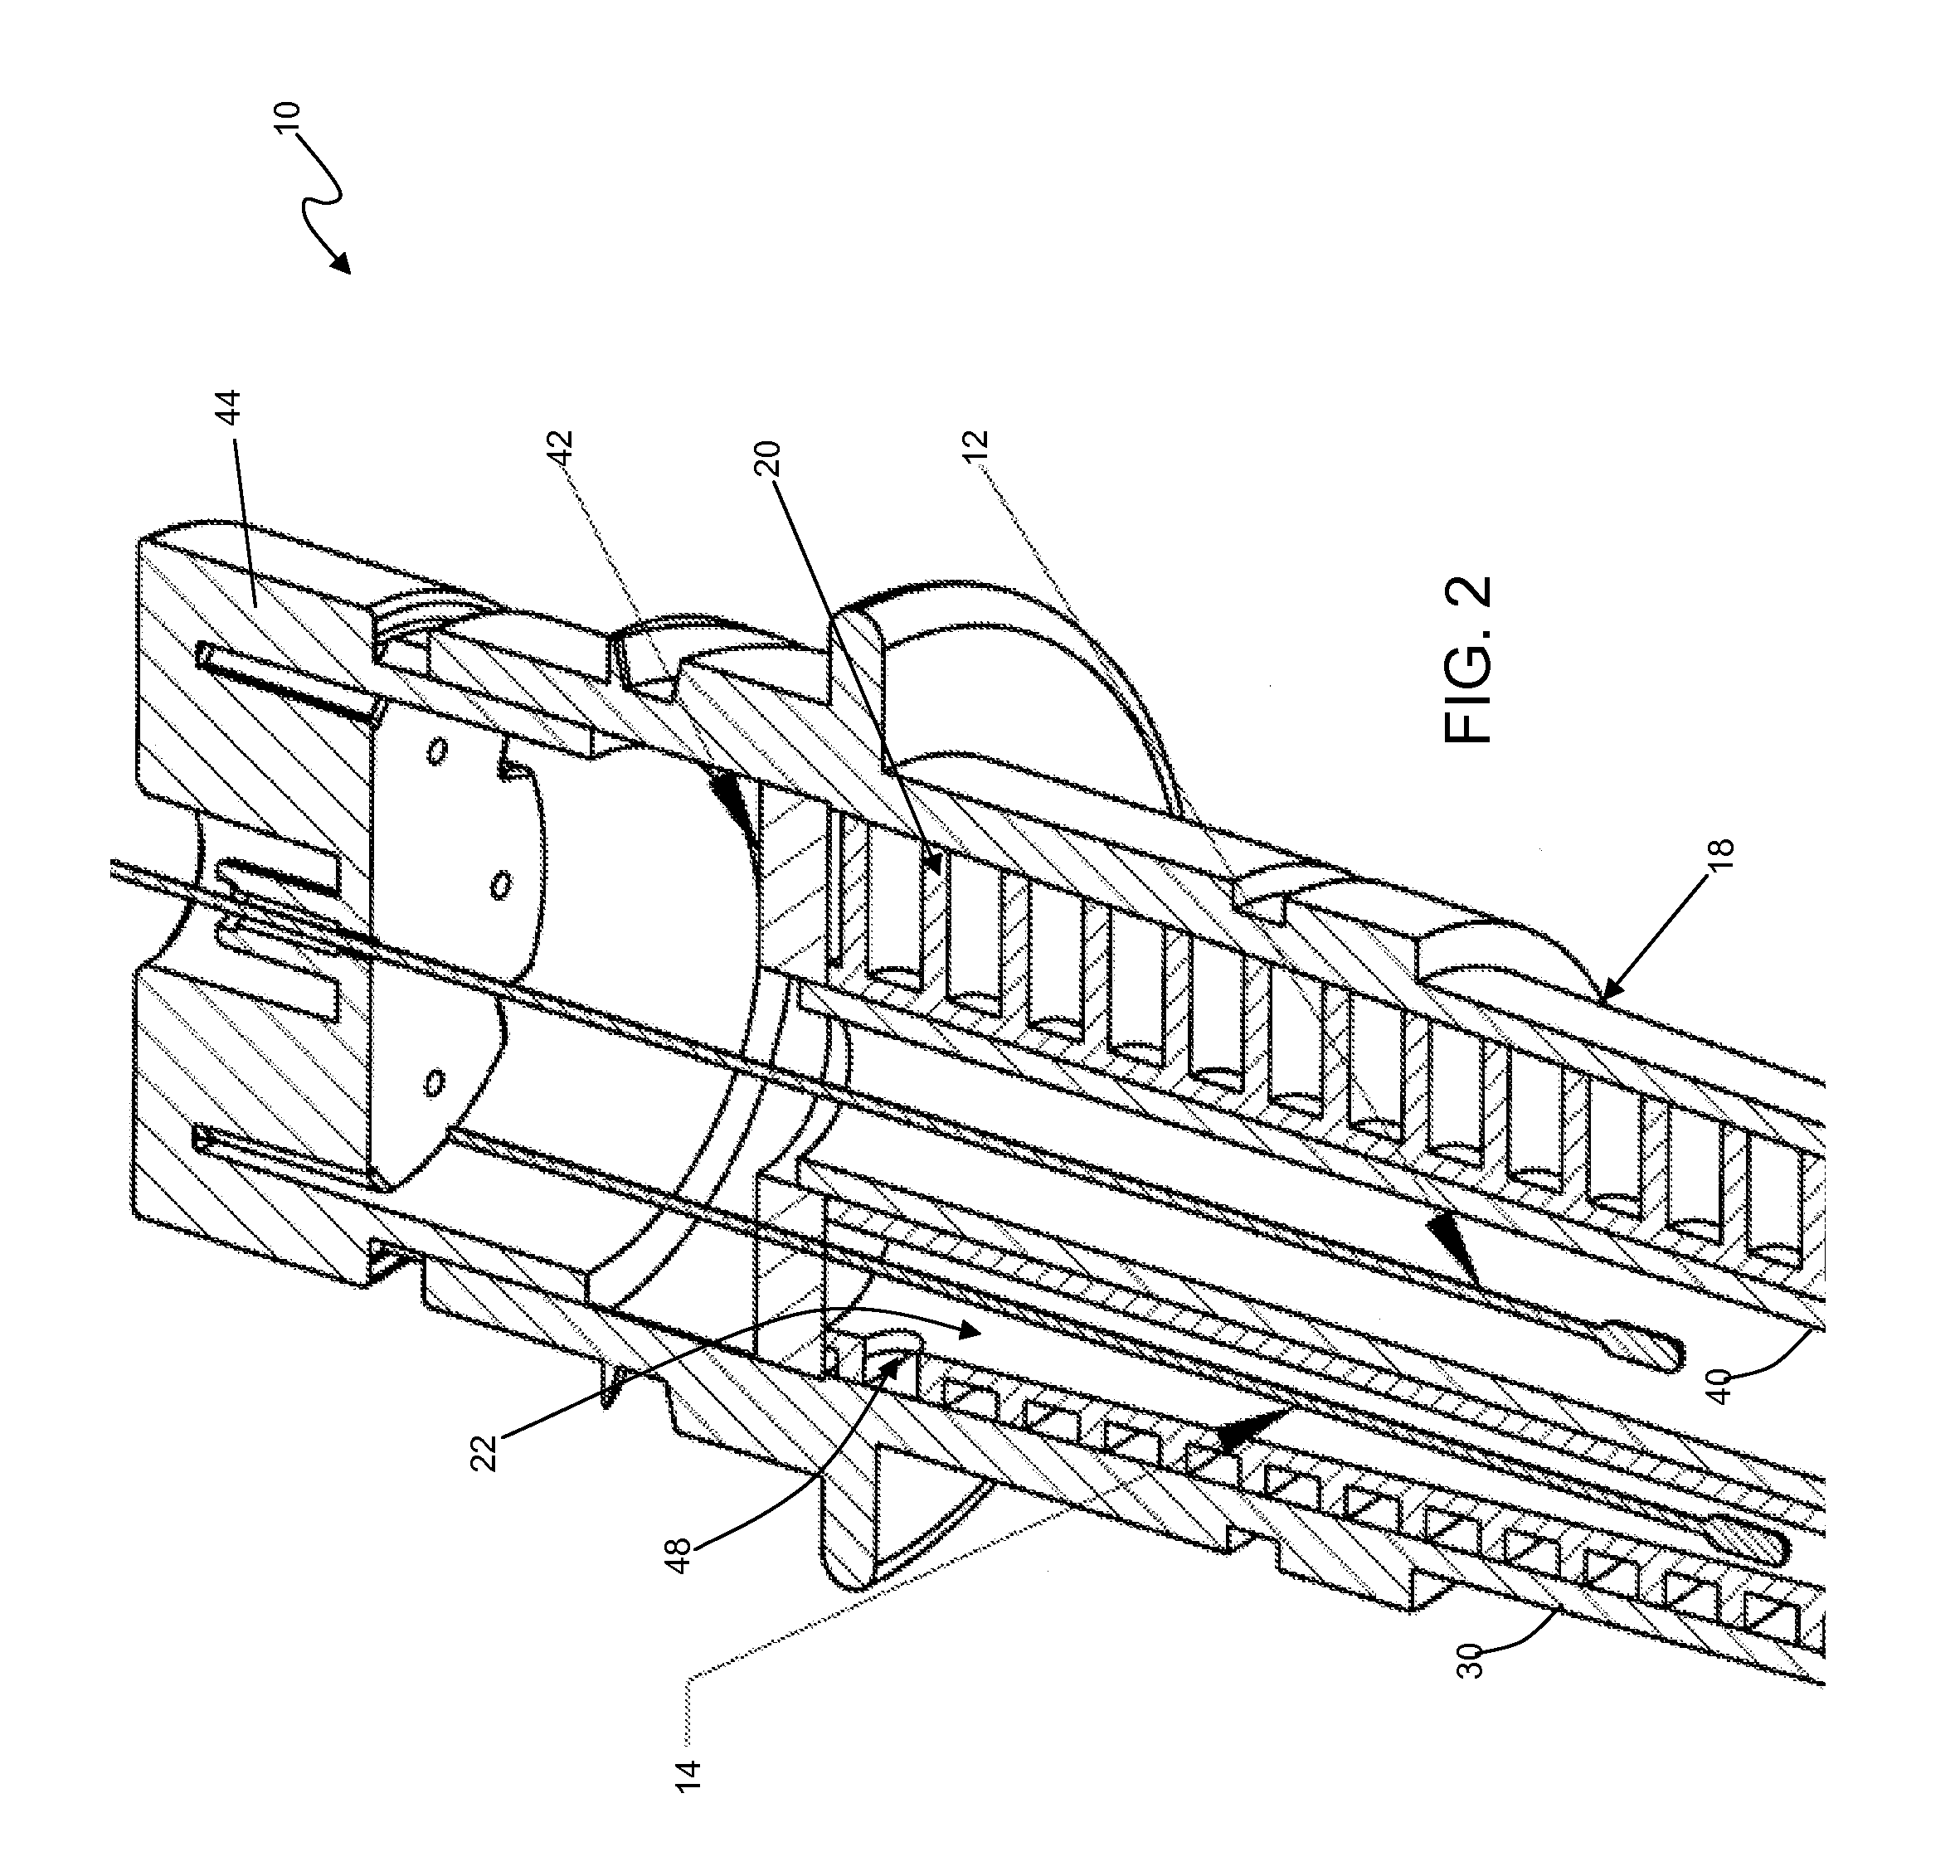 Electrochemical Sensor and Method of Manufacture